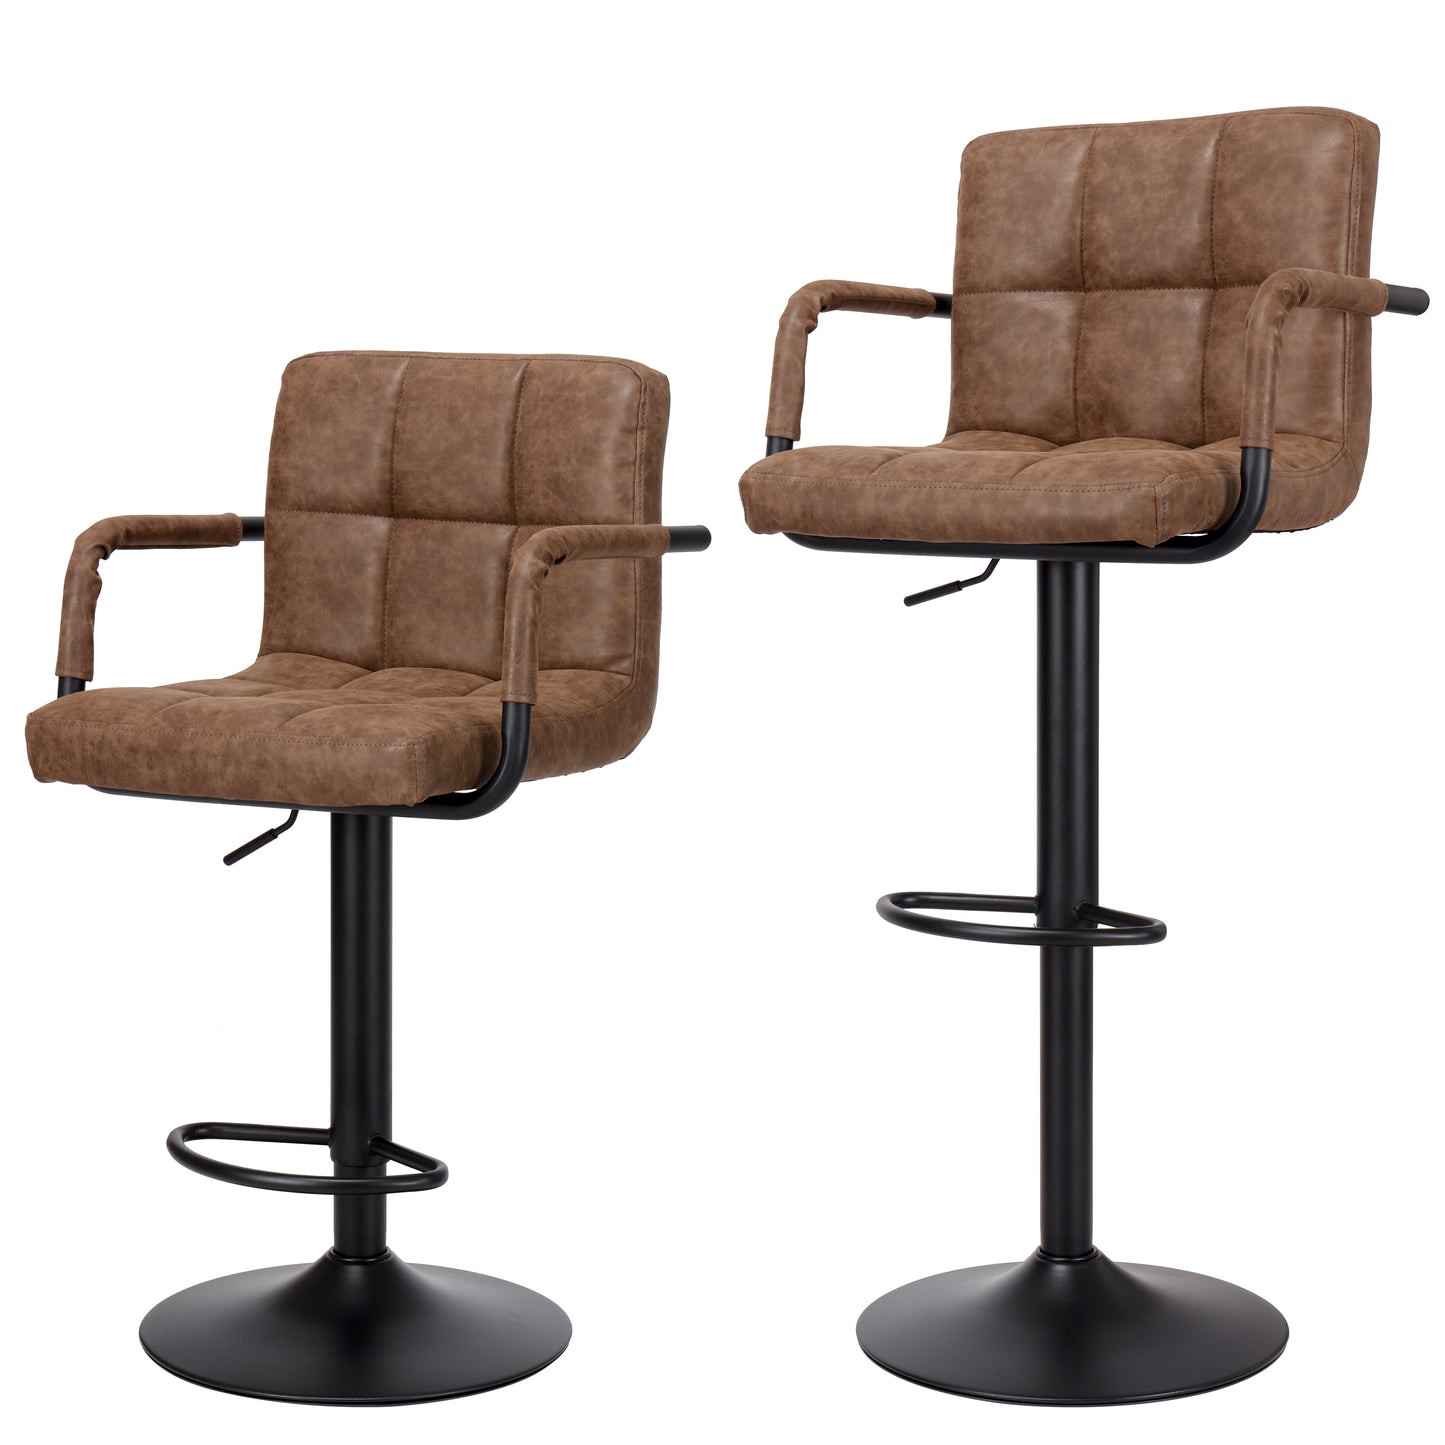 Finnhomy Bar Stools Set of 2 Counter Height, Swivel Barstools with Arm